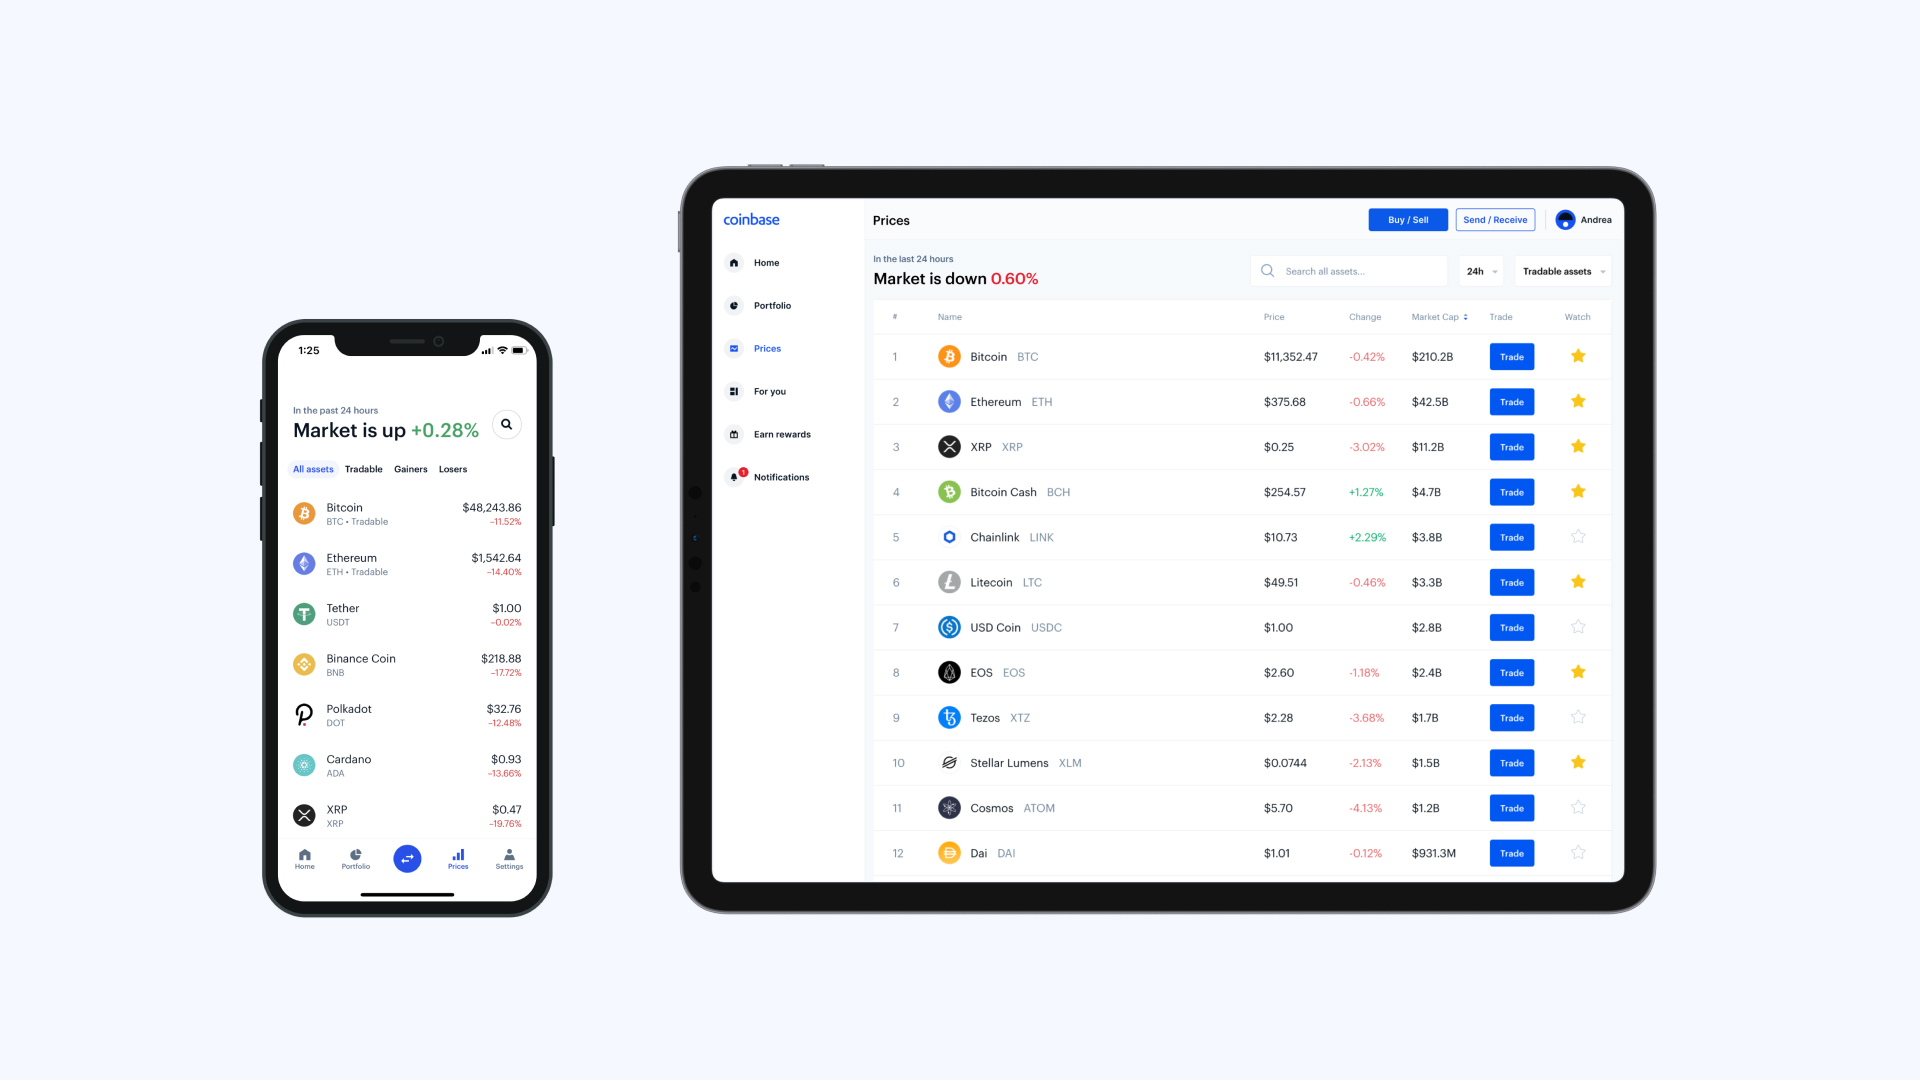 Images of Coinbase's app and website, showing the scalability of their design system.